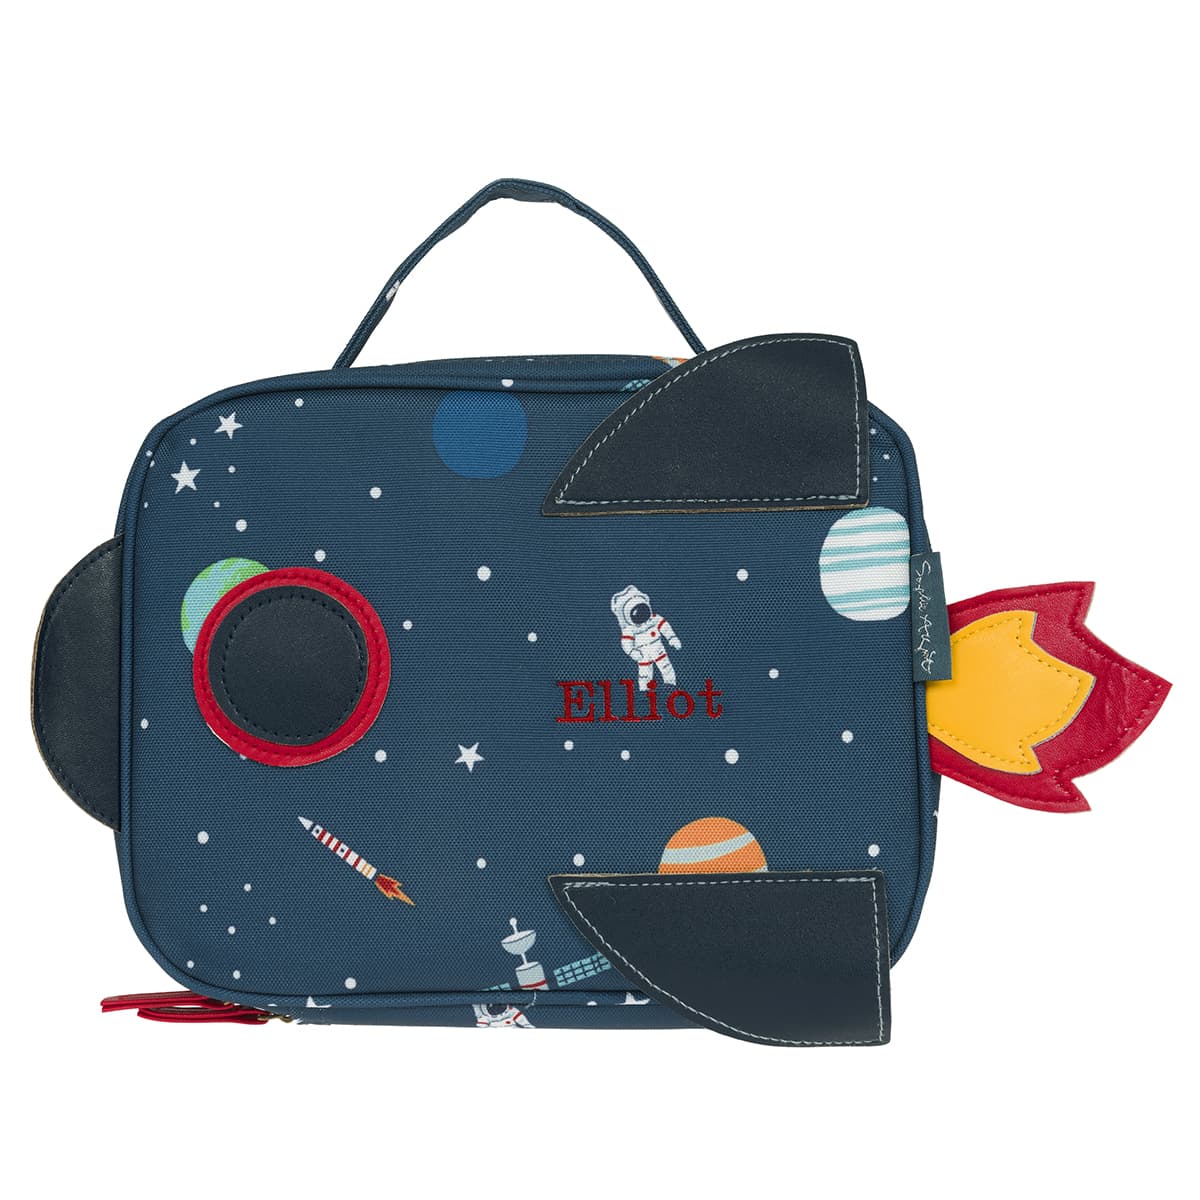 Space Lunch Bag